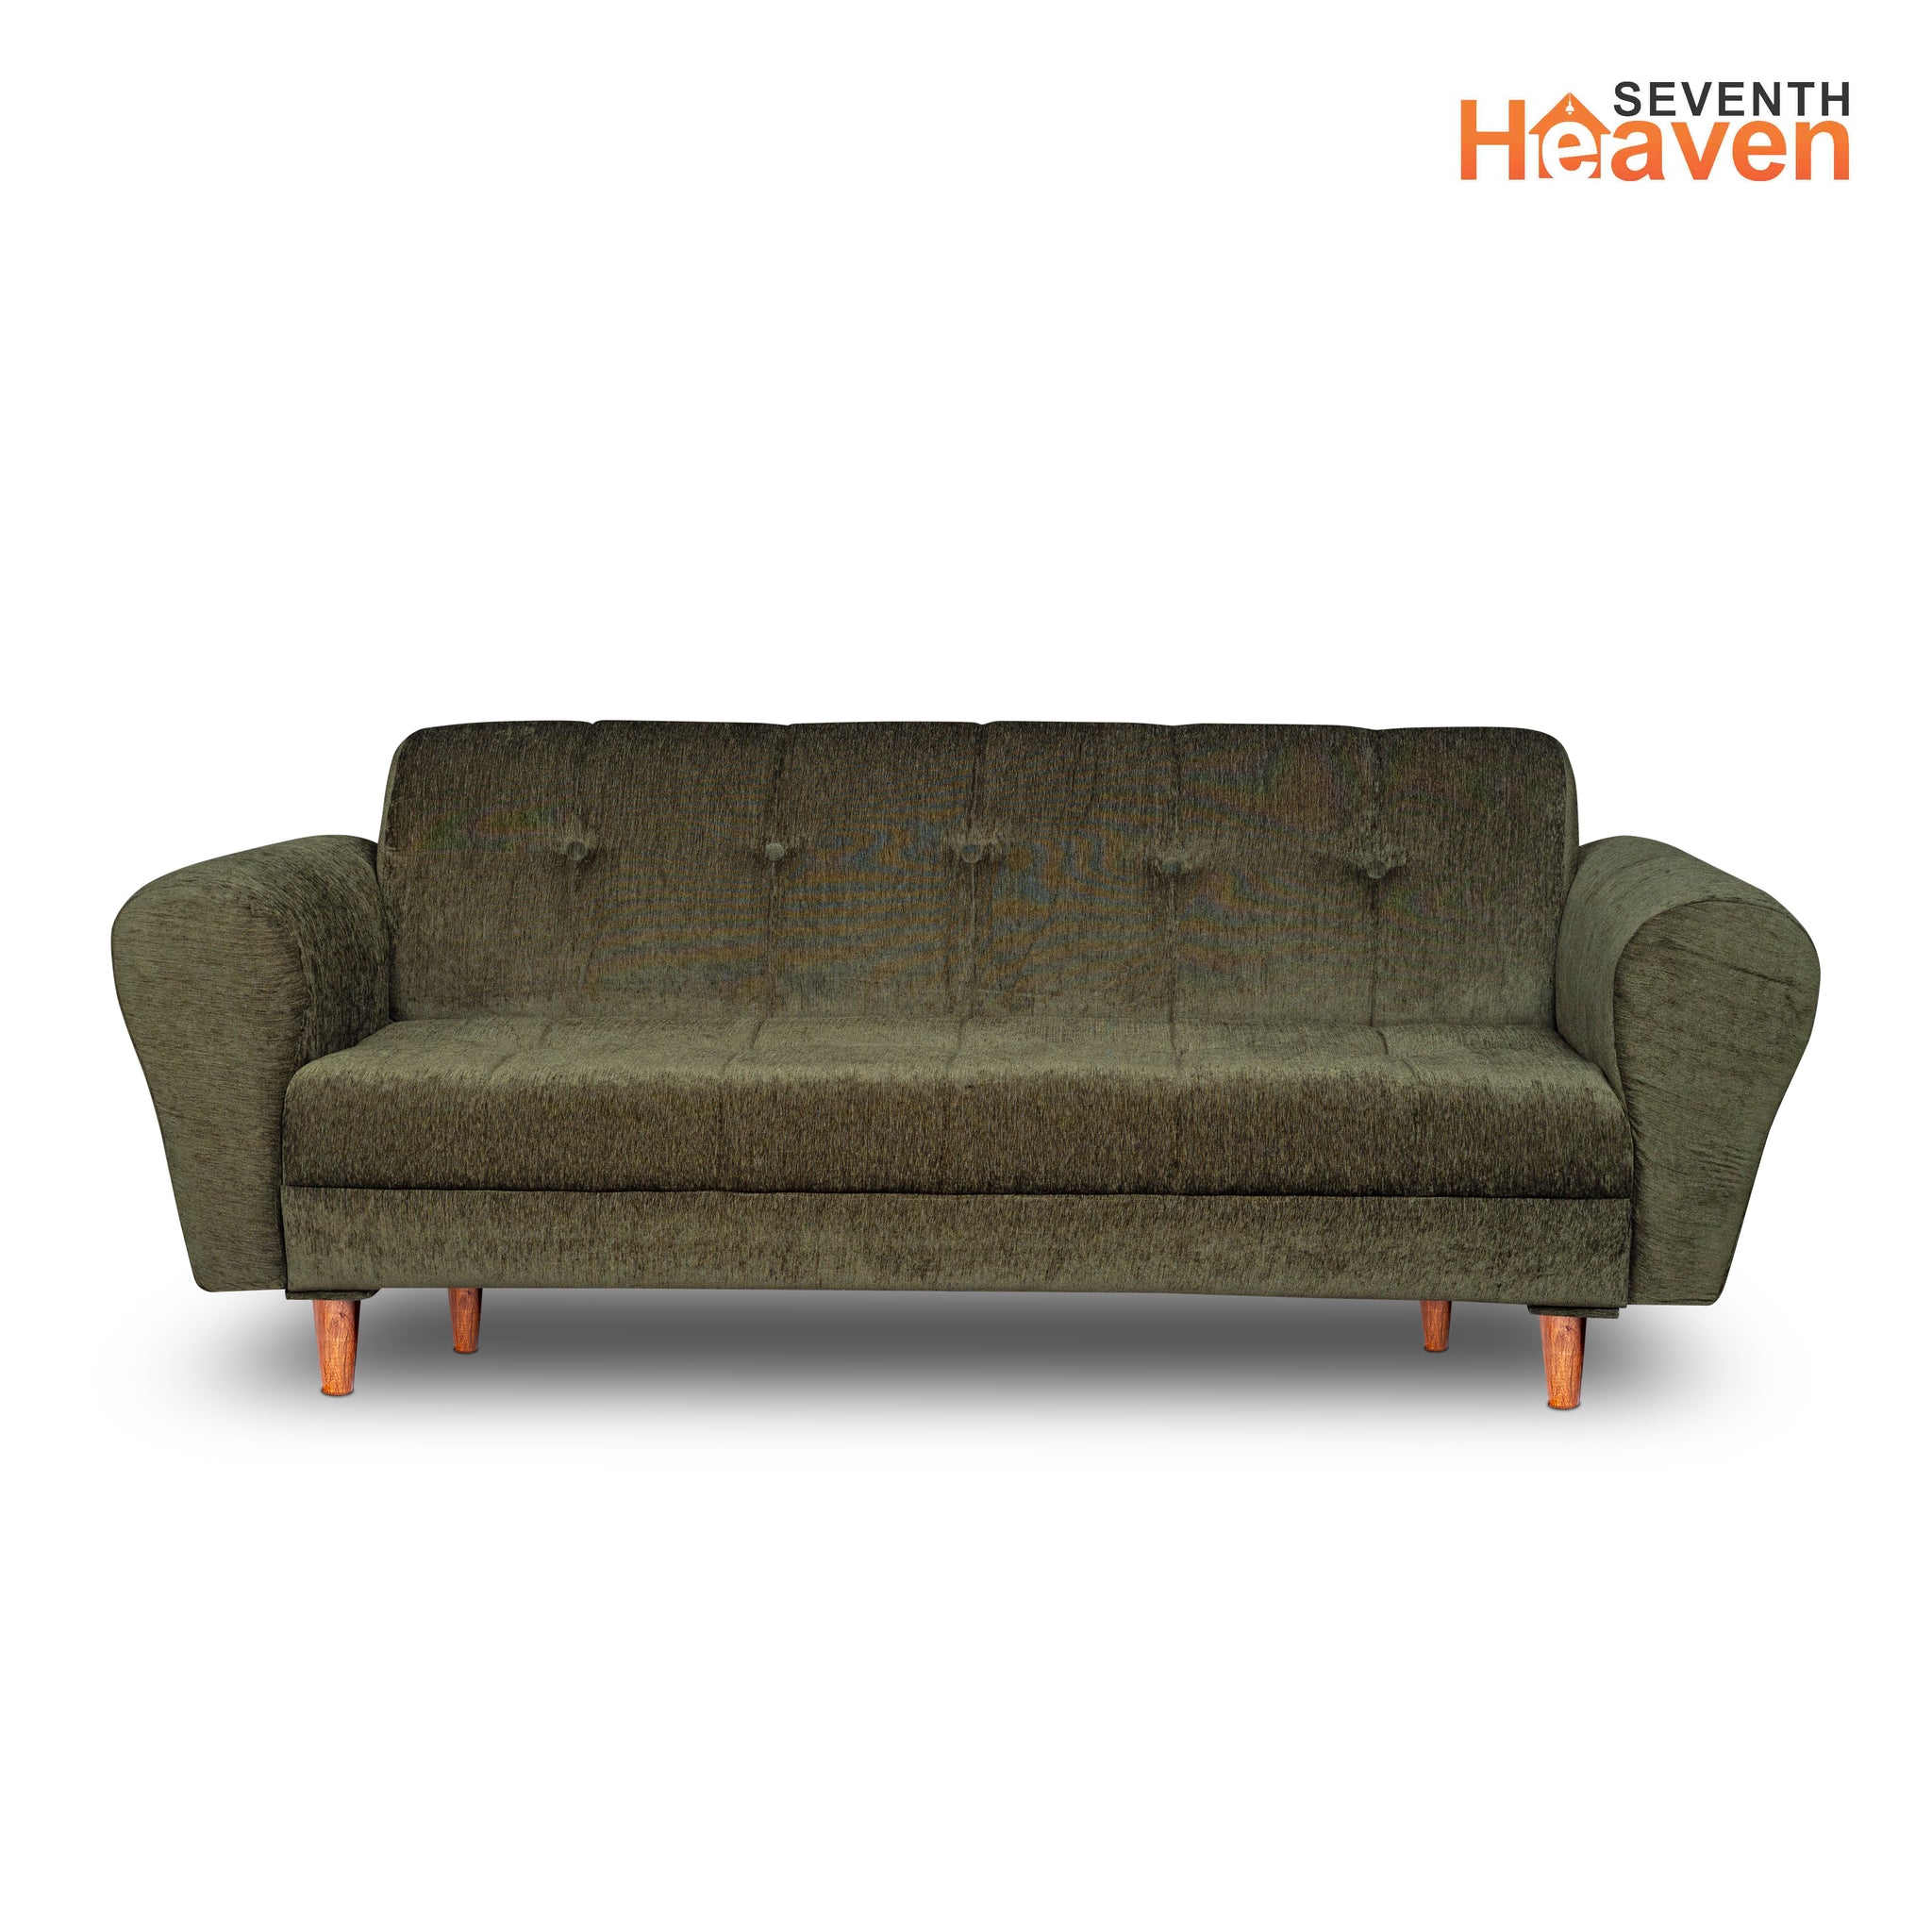 Seventh Heaven Milan 3 Seater Wooden Sofa Set Modern & Elegant Smart Furniture Range for luxurious homes, living rooms and offices. Green Colour Molphino fabric with sheesham polished wooden legs.